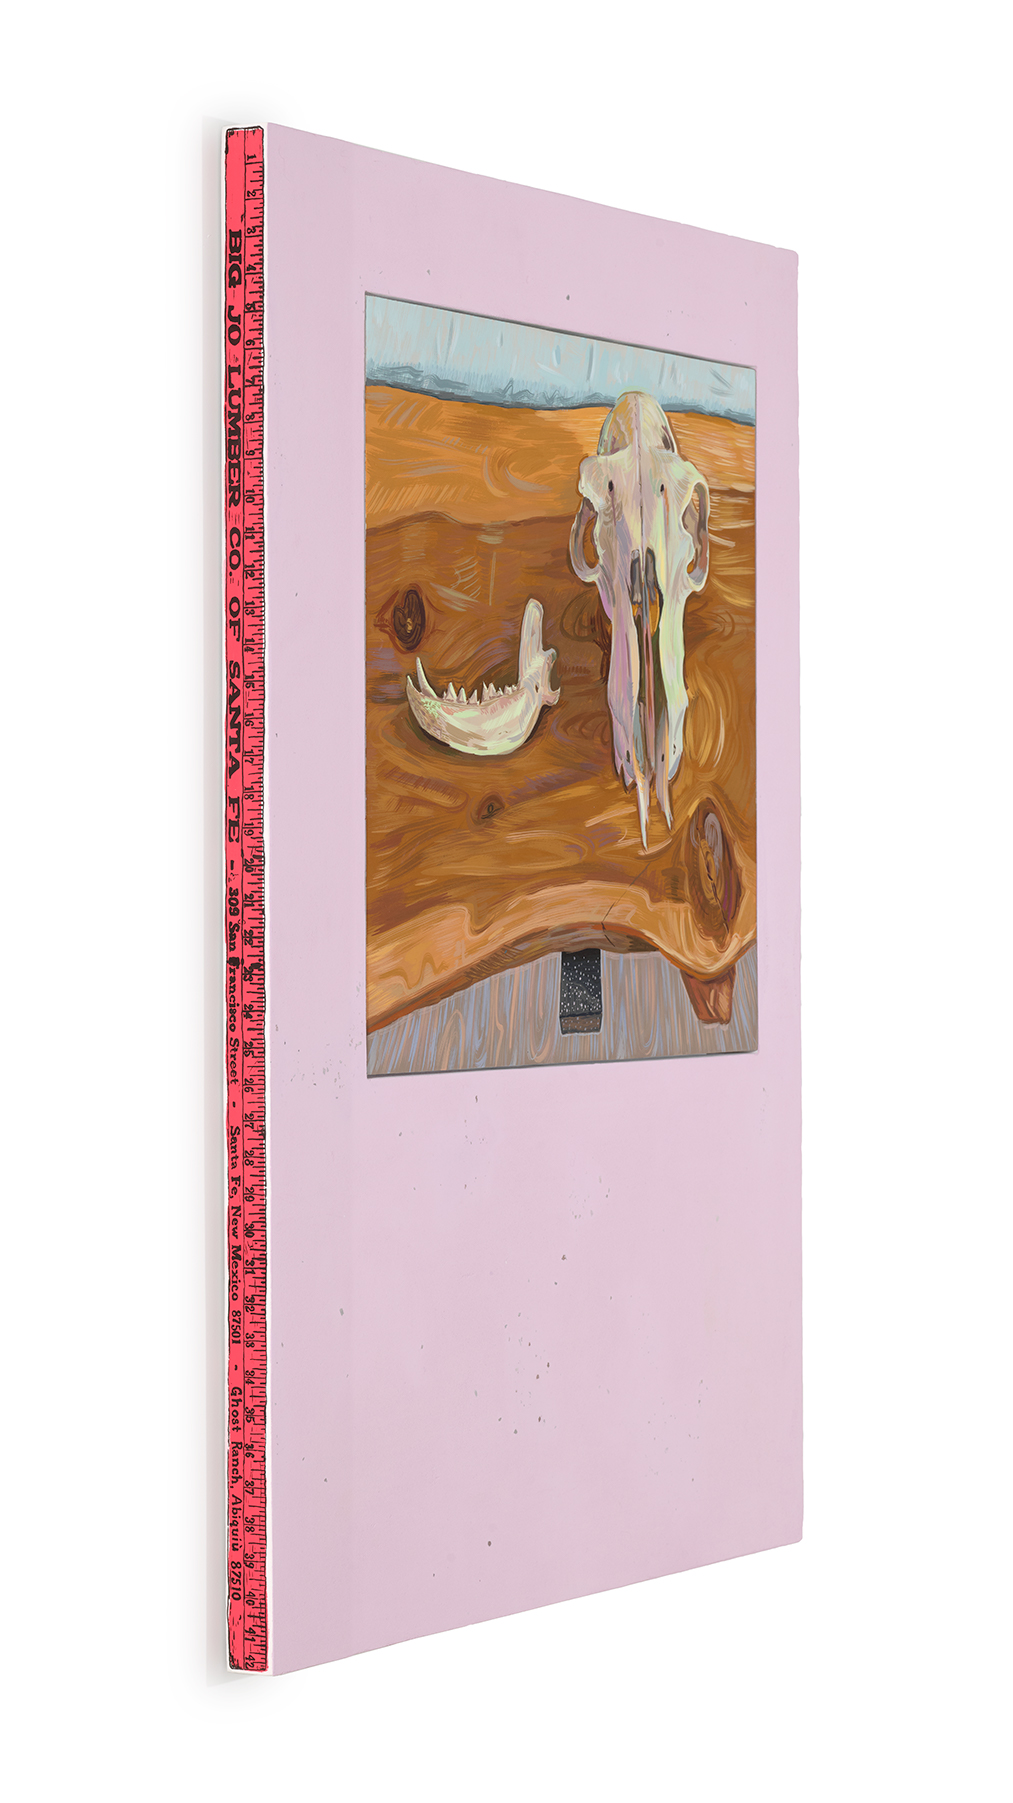 This is an image that shows the side view of O'Keeffe's Skulls showing a screen printed ruler painted along the edge of the painting with a pink background and black numbers.